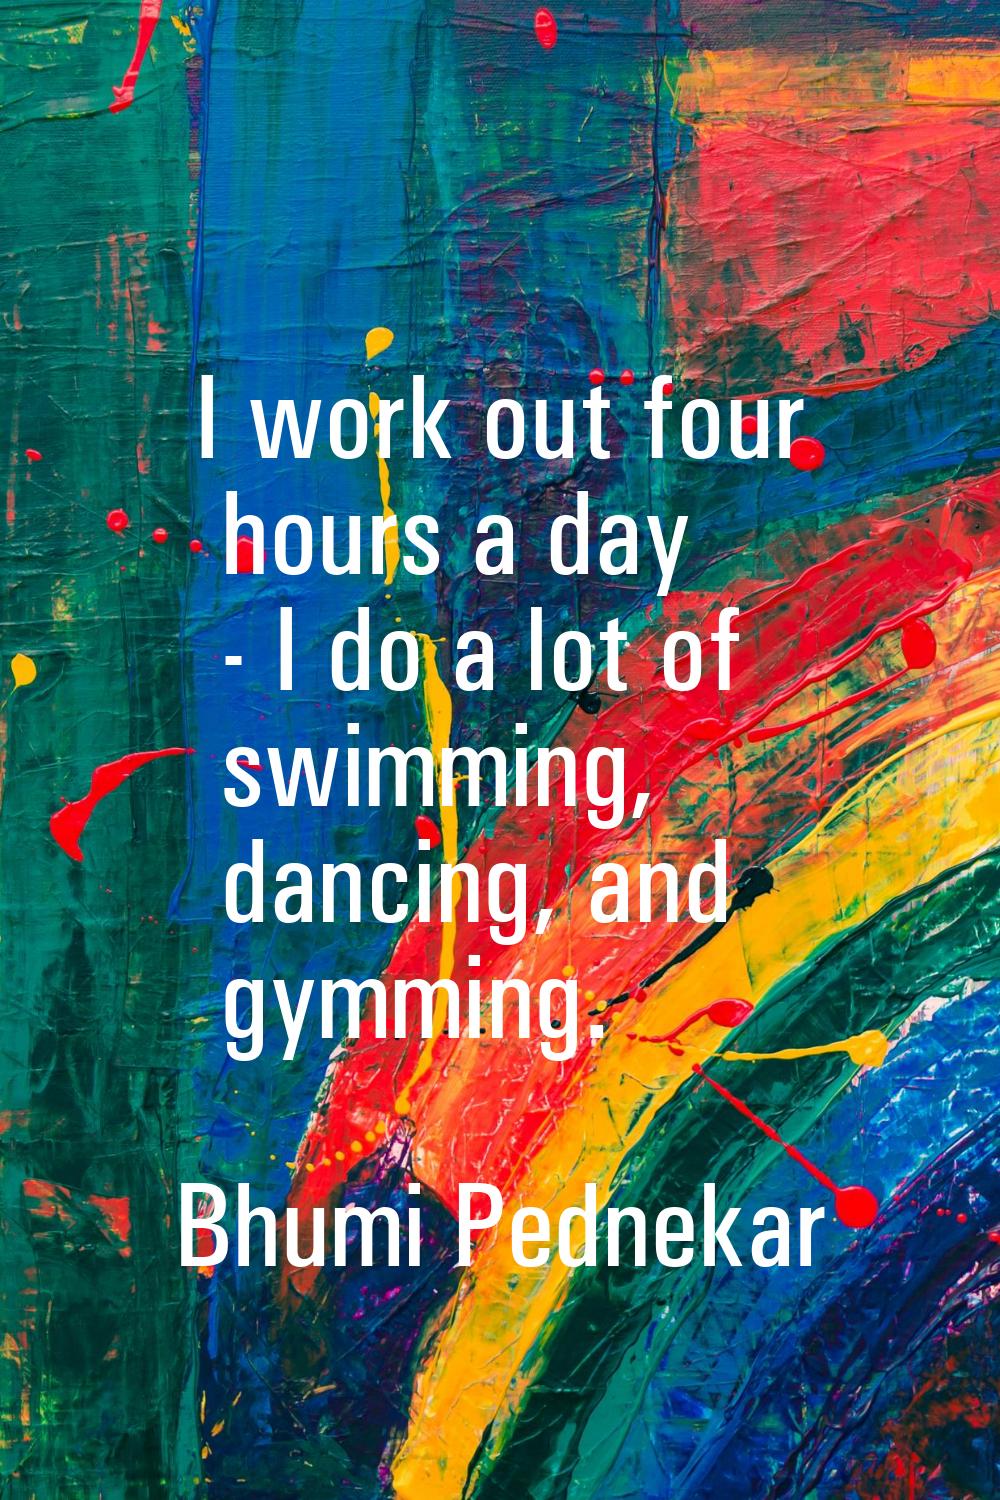 I work out four hours a day - I do a lot of swimming, dancing, and gymming.